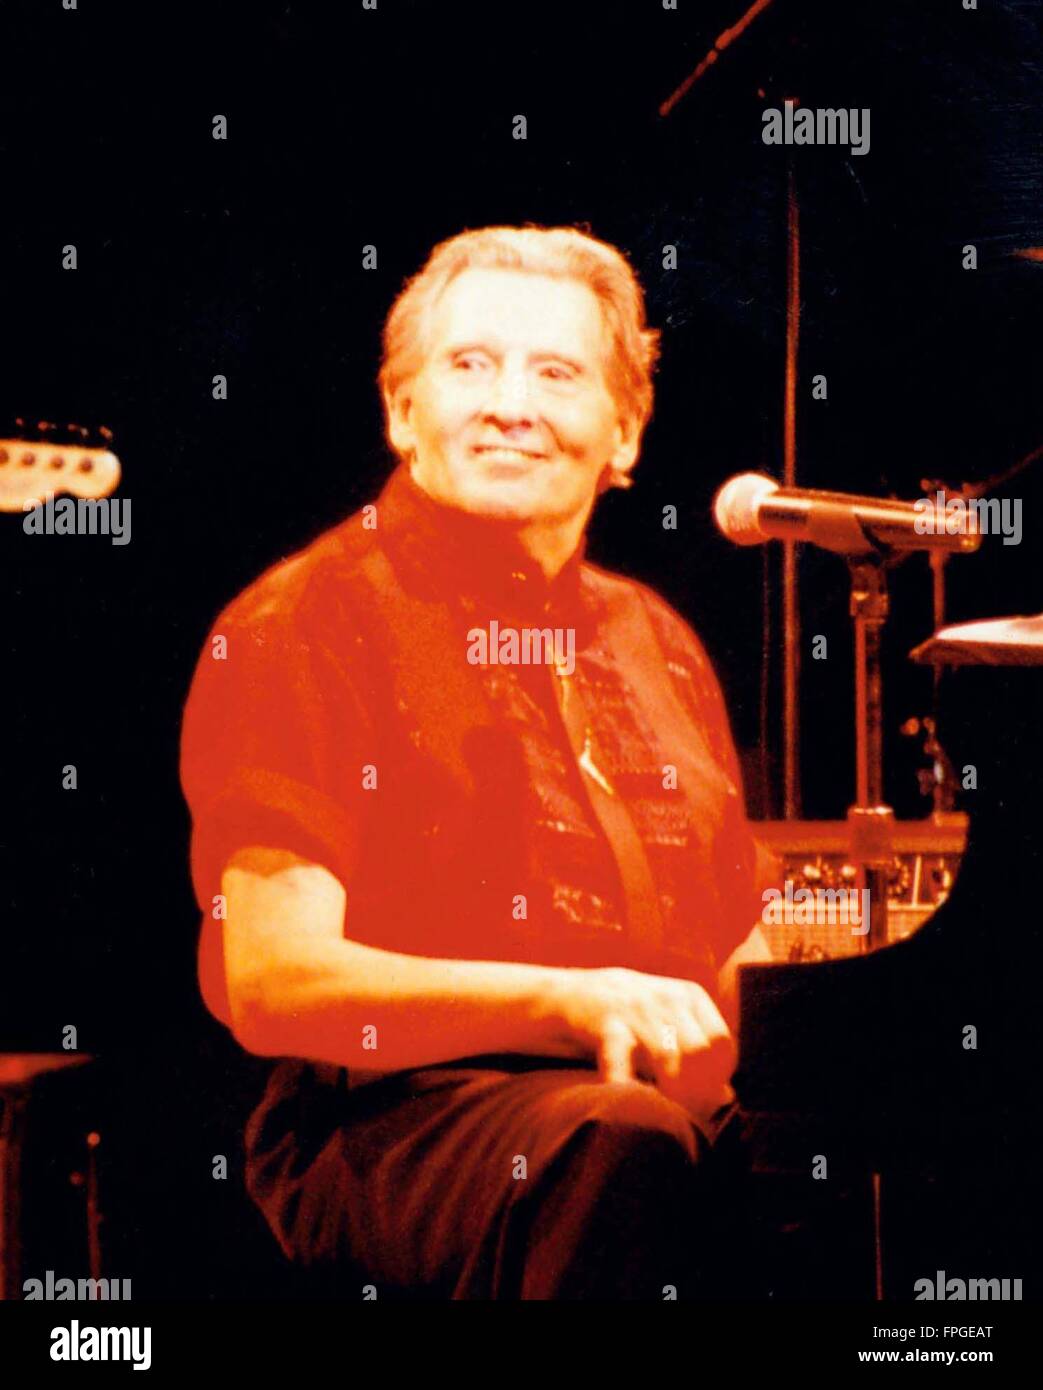 Jerry Lee Lewis performing at The Westbury music fair in New York City 08 15 1998 Photo by Michael Brito Stock Photo